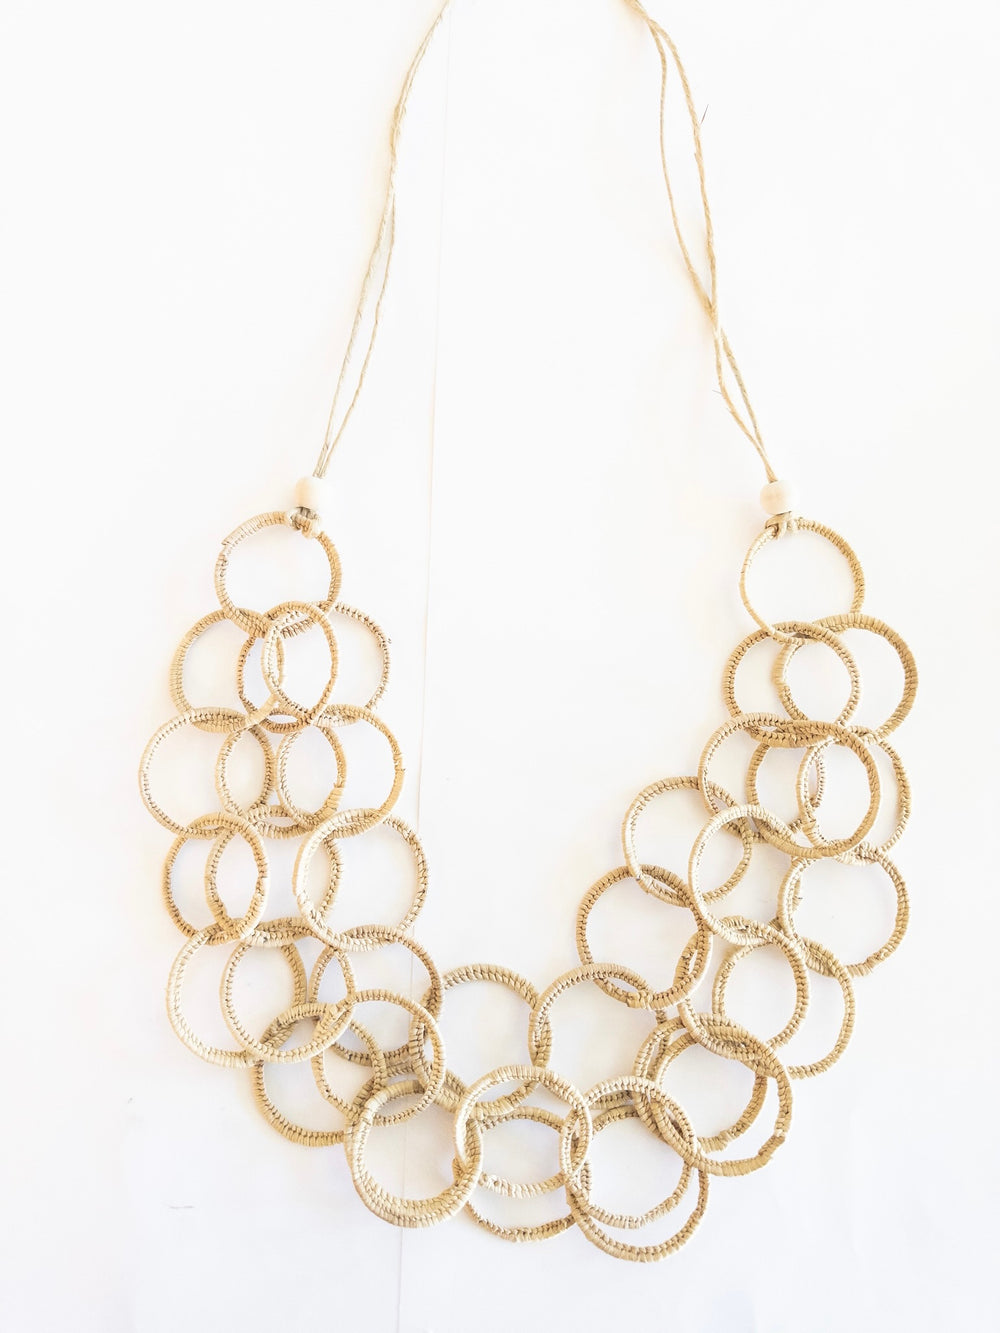 Ayita handmade interlocking rings necklace made from iraca in natural color